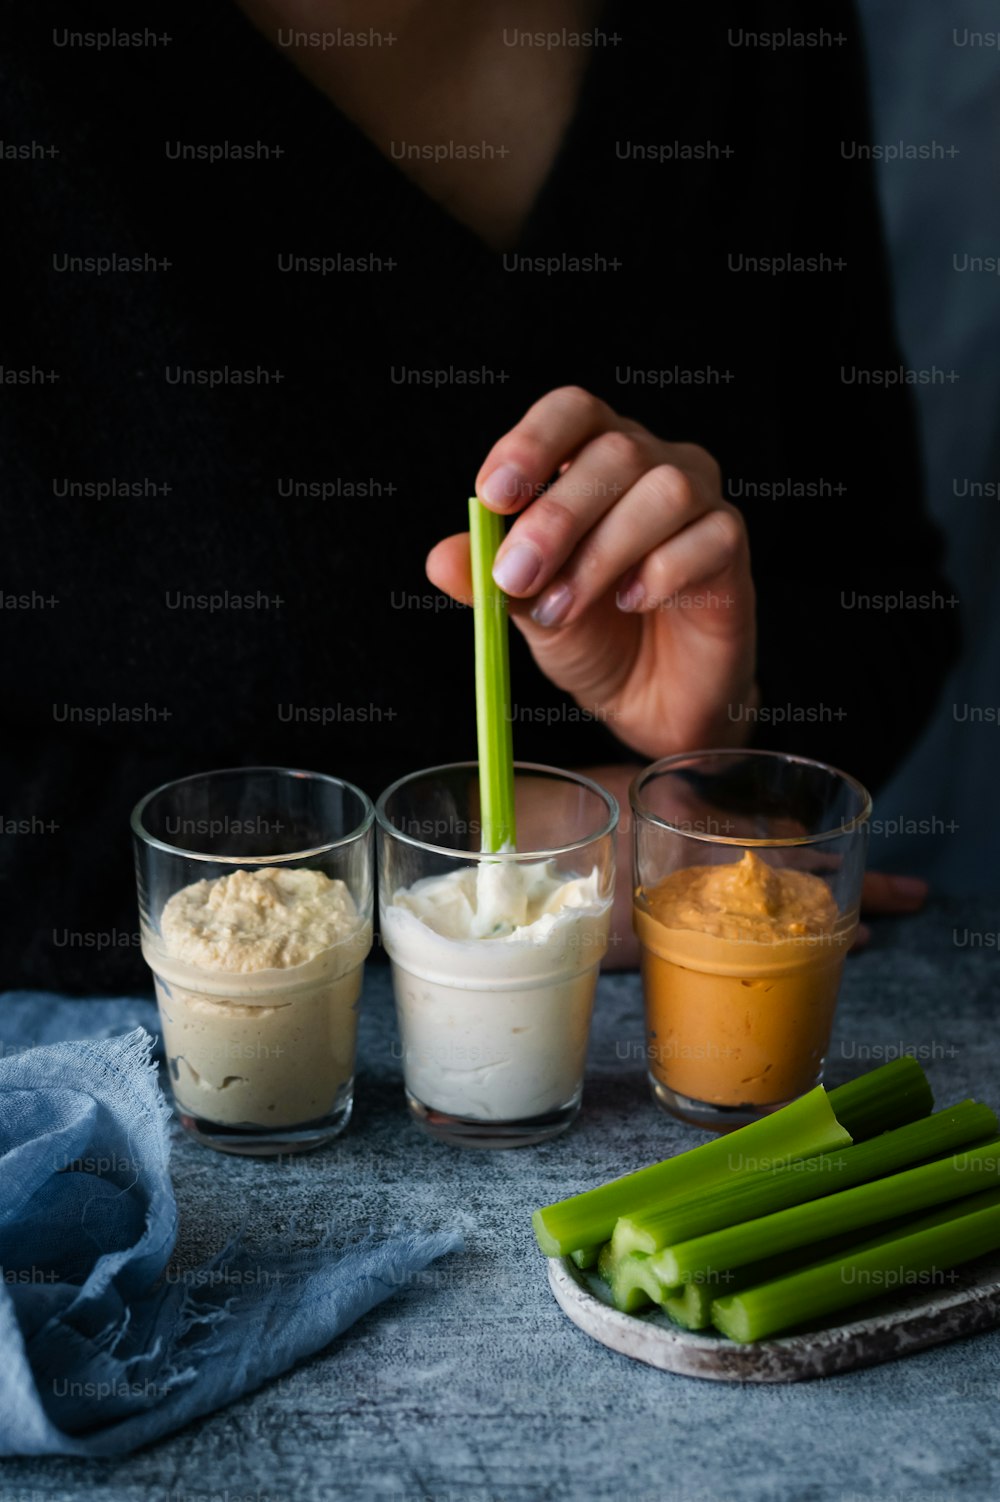 a person holding a green straw over a plate of food